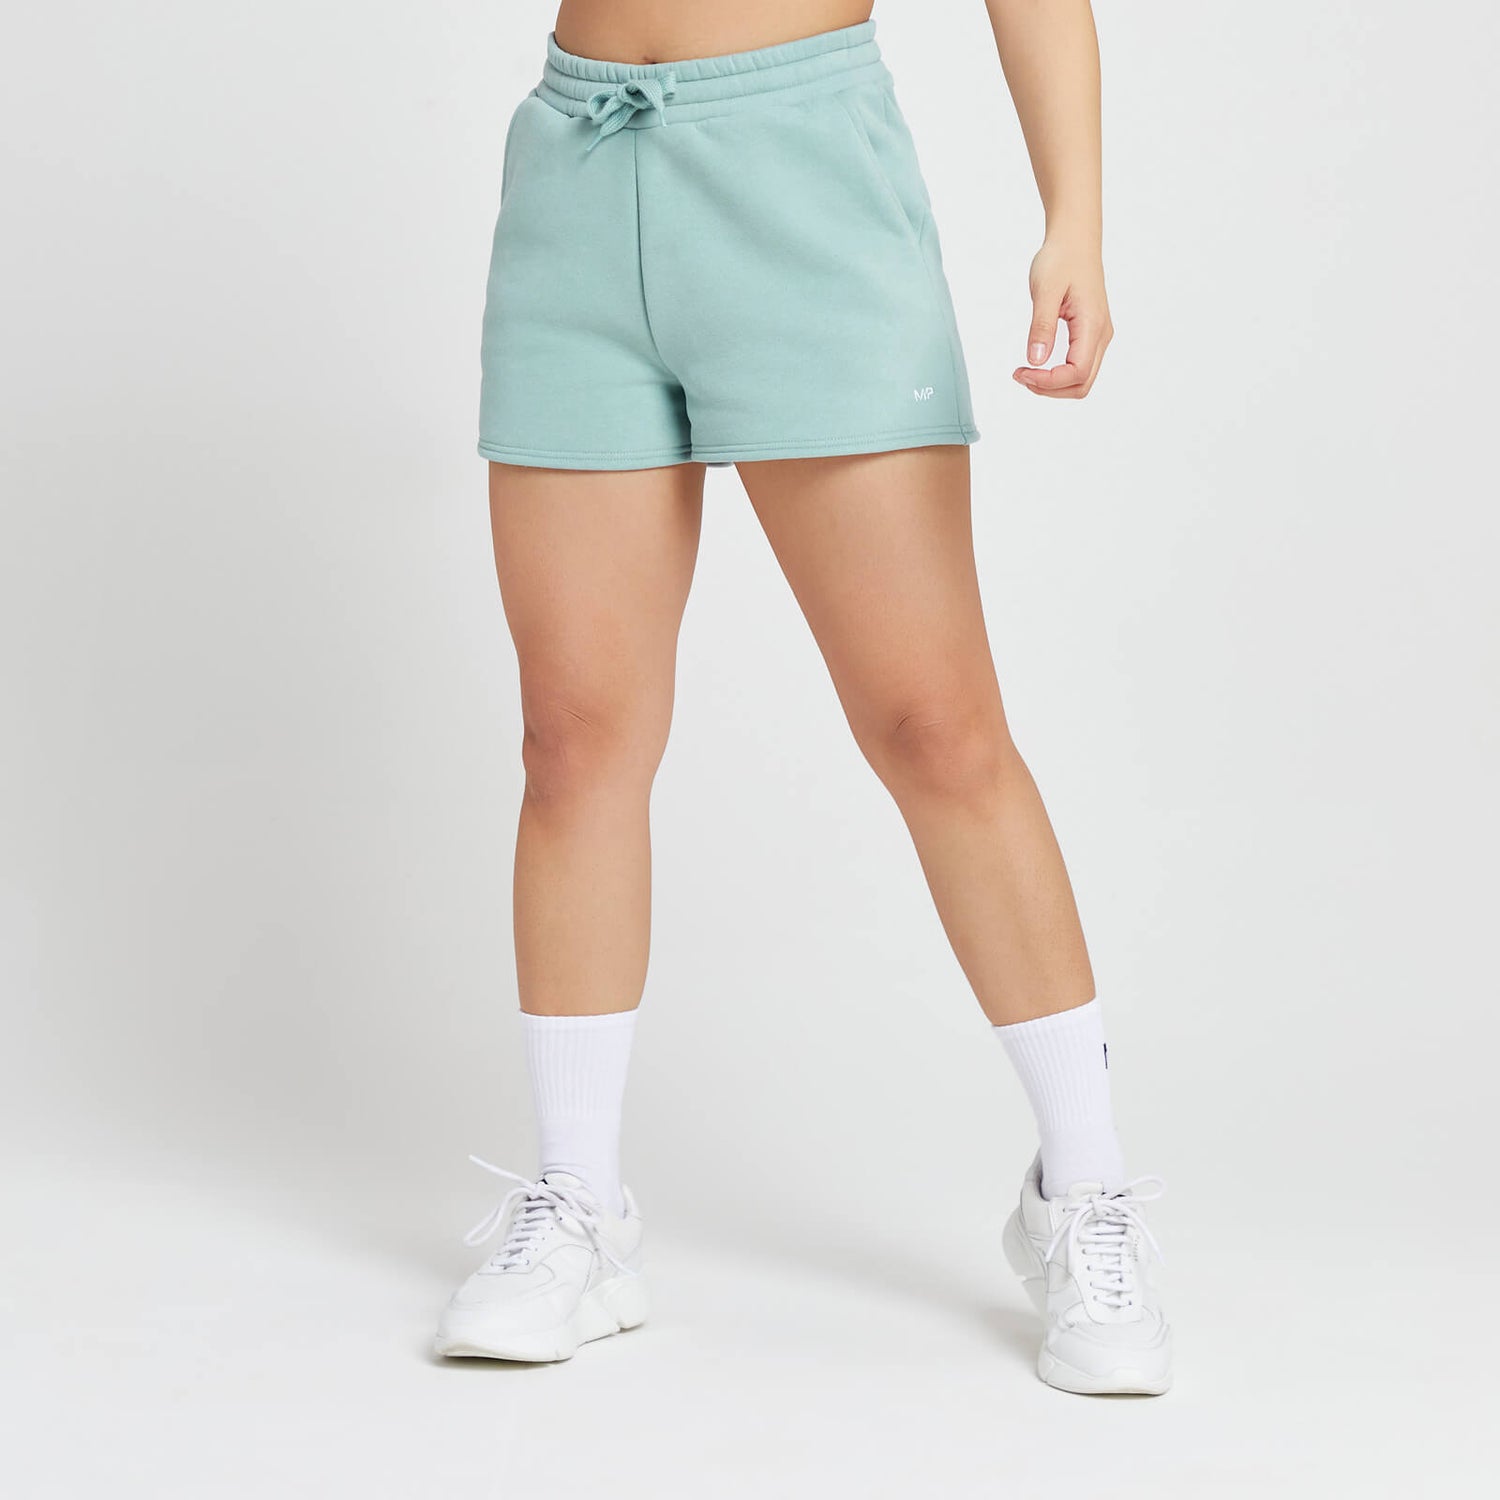 MP Women's Rest Day Lounge Shorts - Ice Blue - M